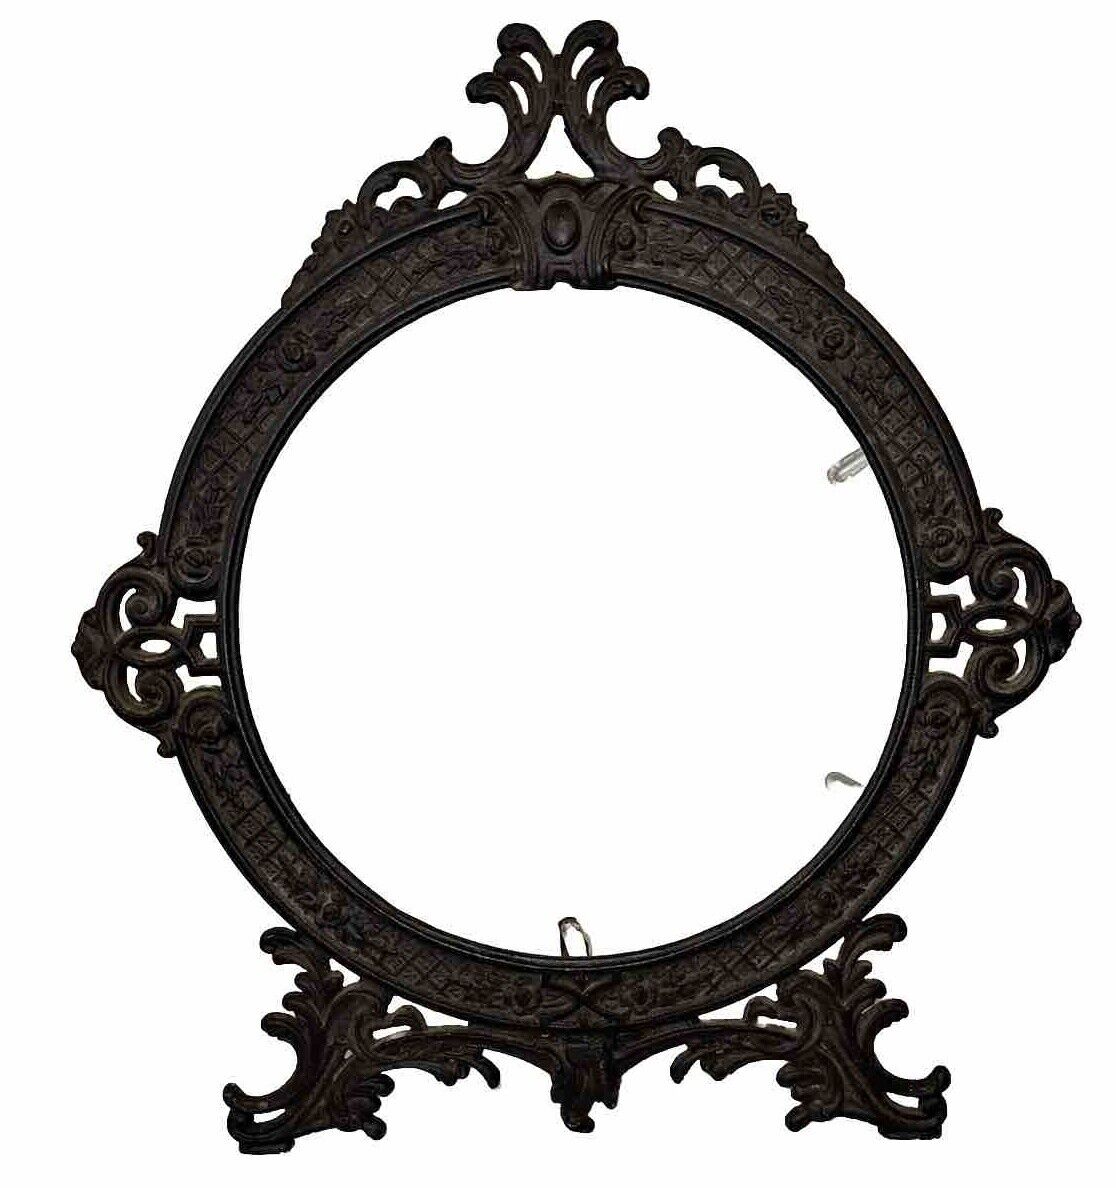 Antique Wrought Iron Picture Frame Very Ornate With Kick Stand Or Can Be Hung